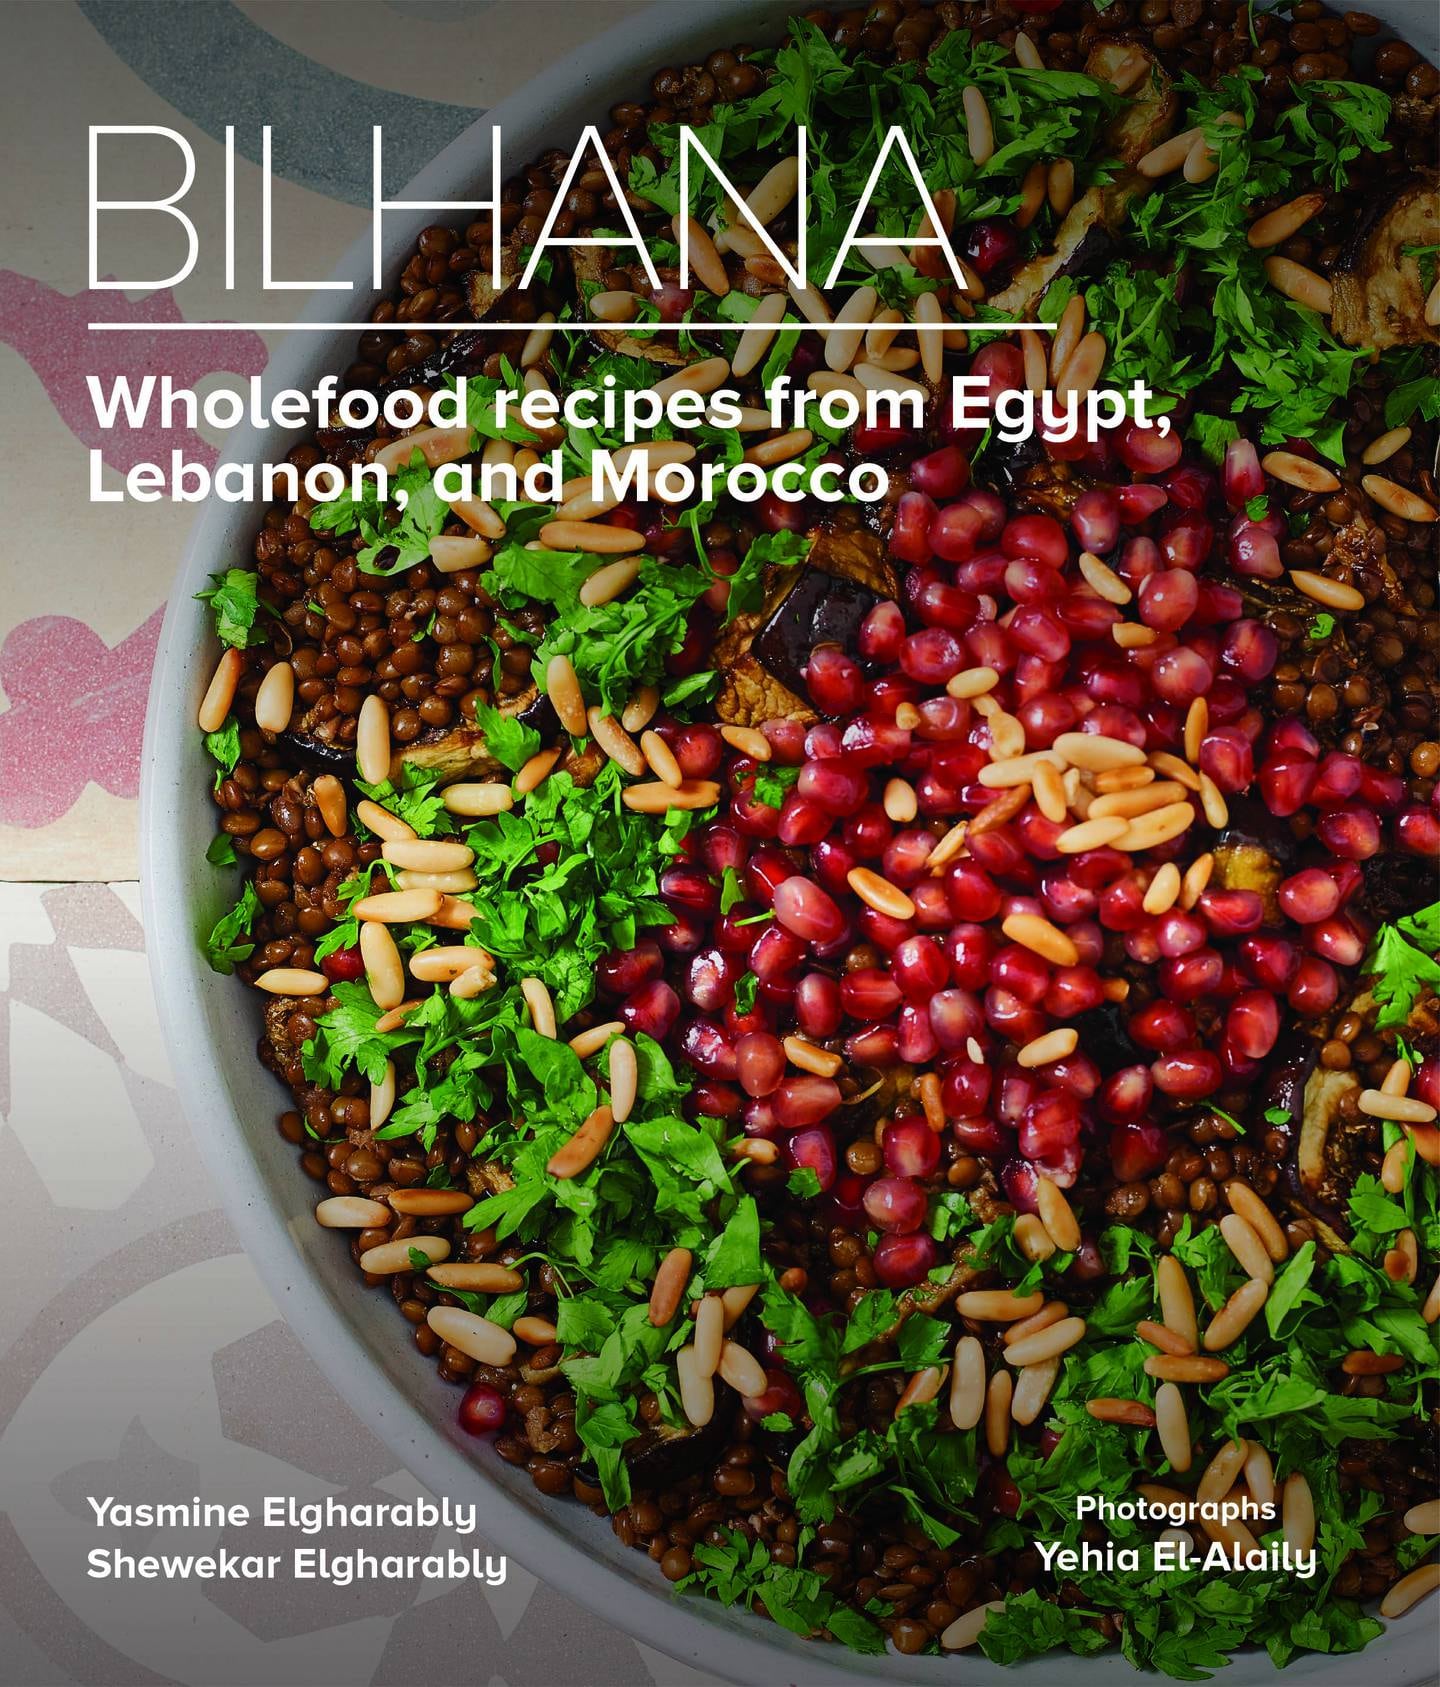 It took the author duo two years to finalise 'Bilhana' – from developing and testing some recipes to perfection, and editing, modifying and replacing others